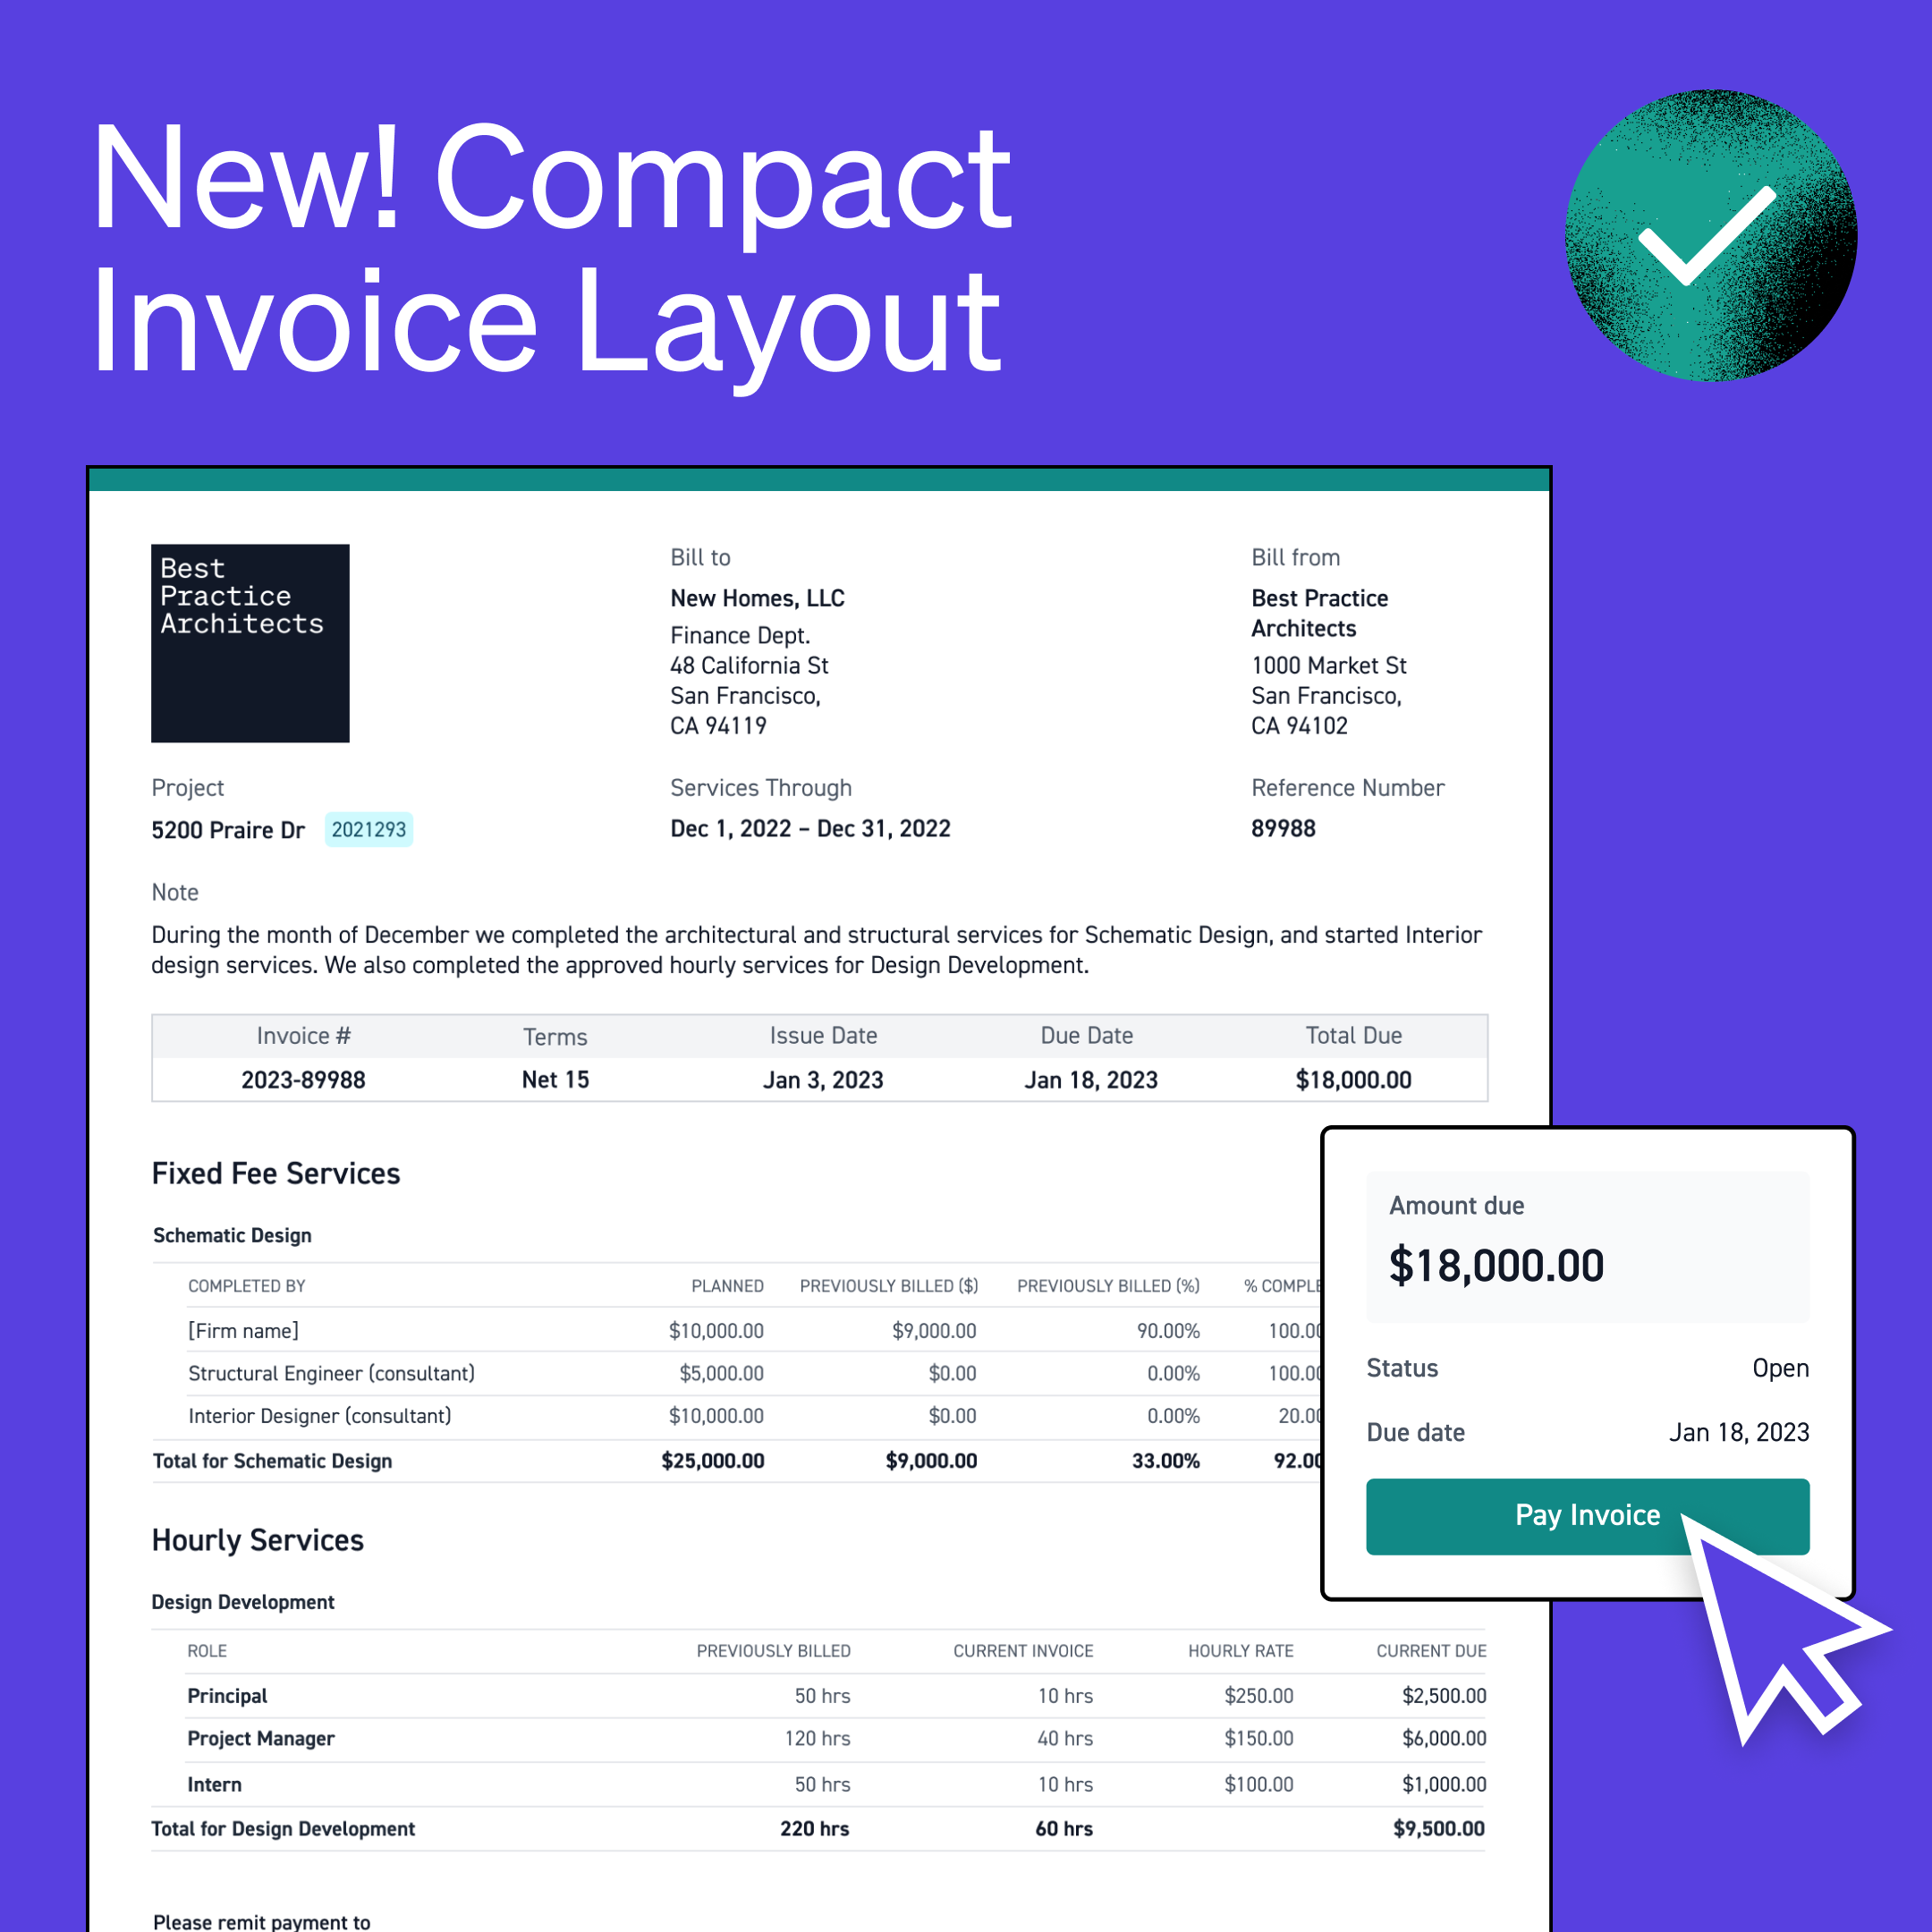 Monograph Invoices Compact Layout